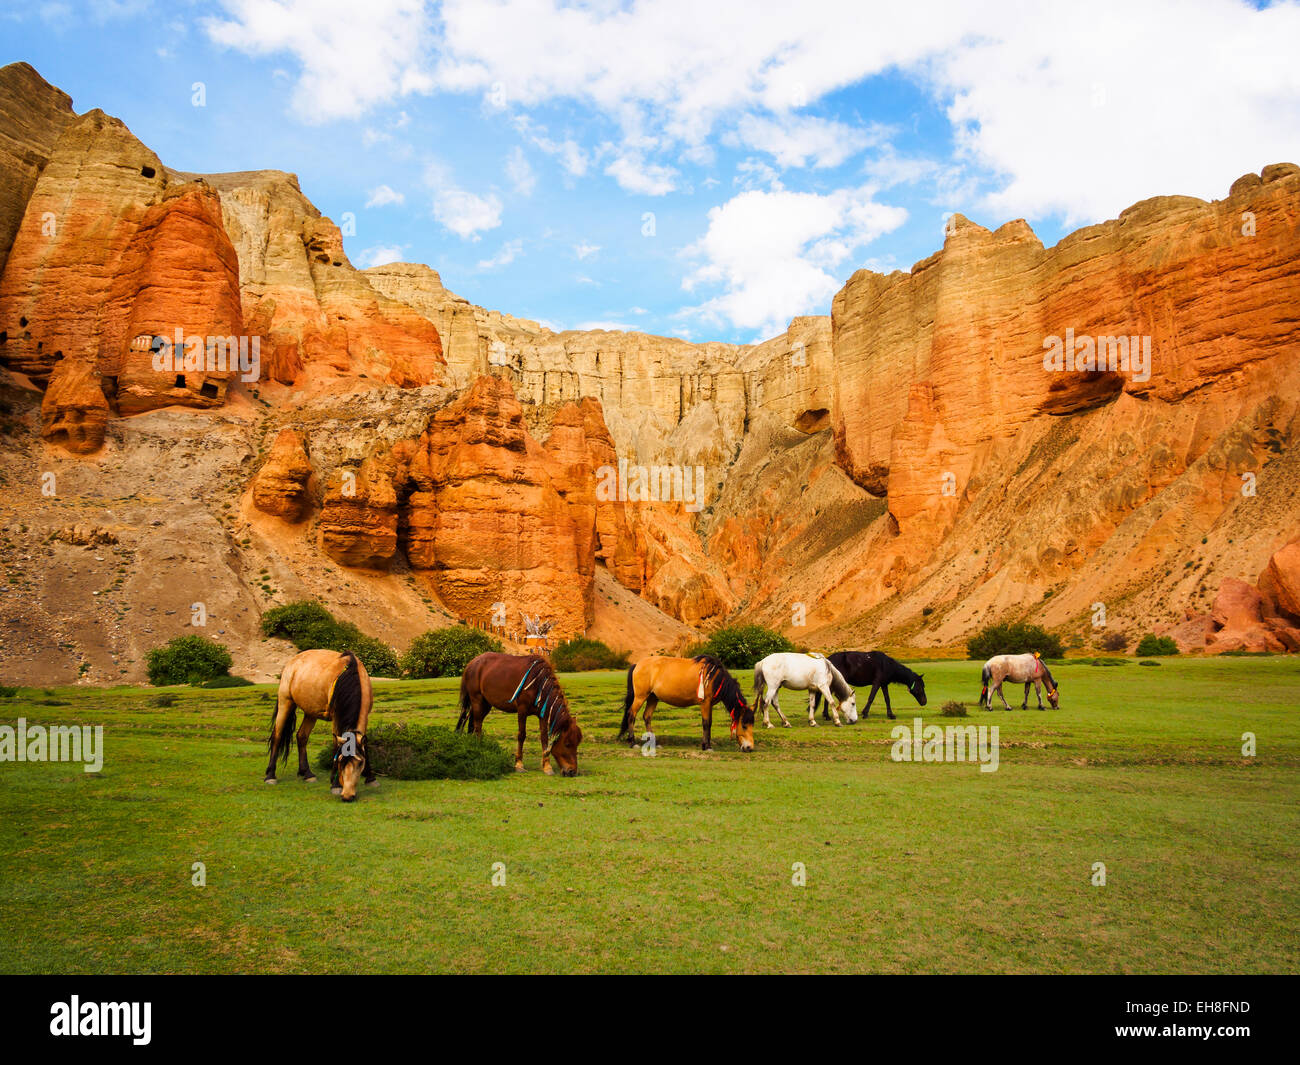 Horses graze on spring-fed green grass in front of red cliffs above the village of Dhakmar, Mustang, Nepal Stock Photo